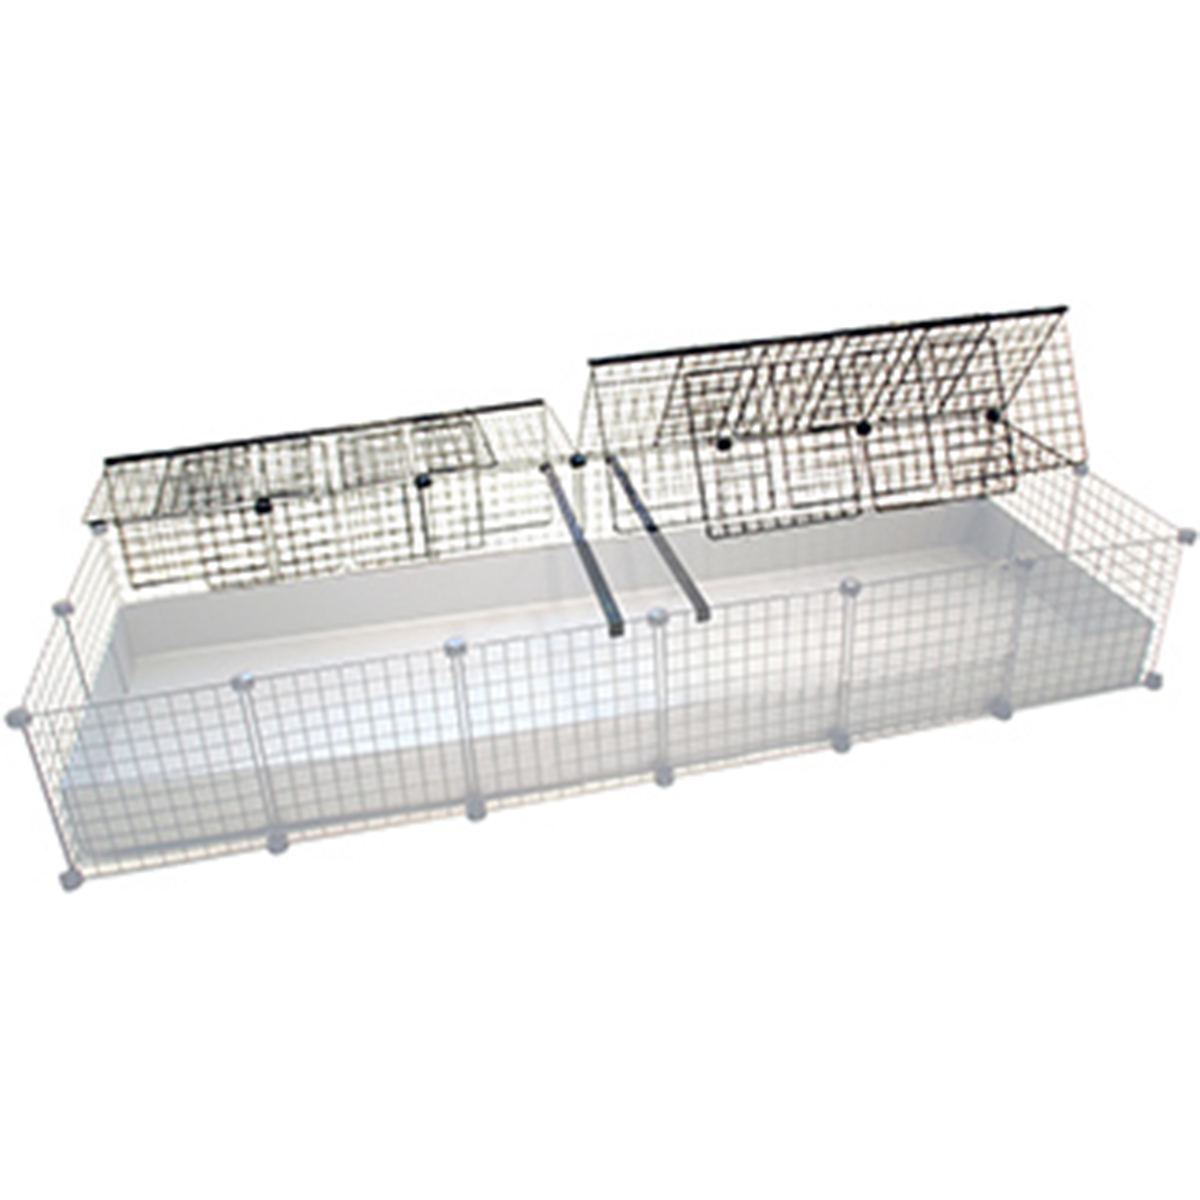 Jumbo Cage with cover tented back